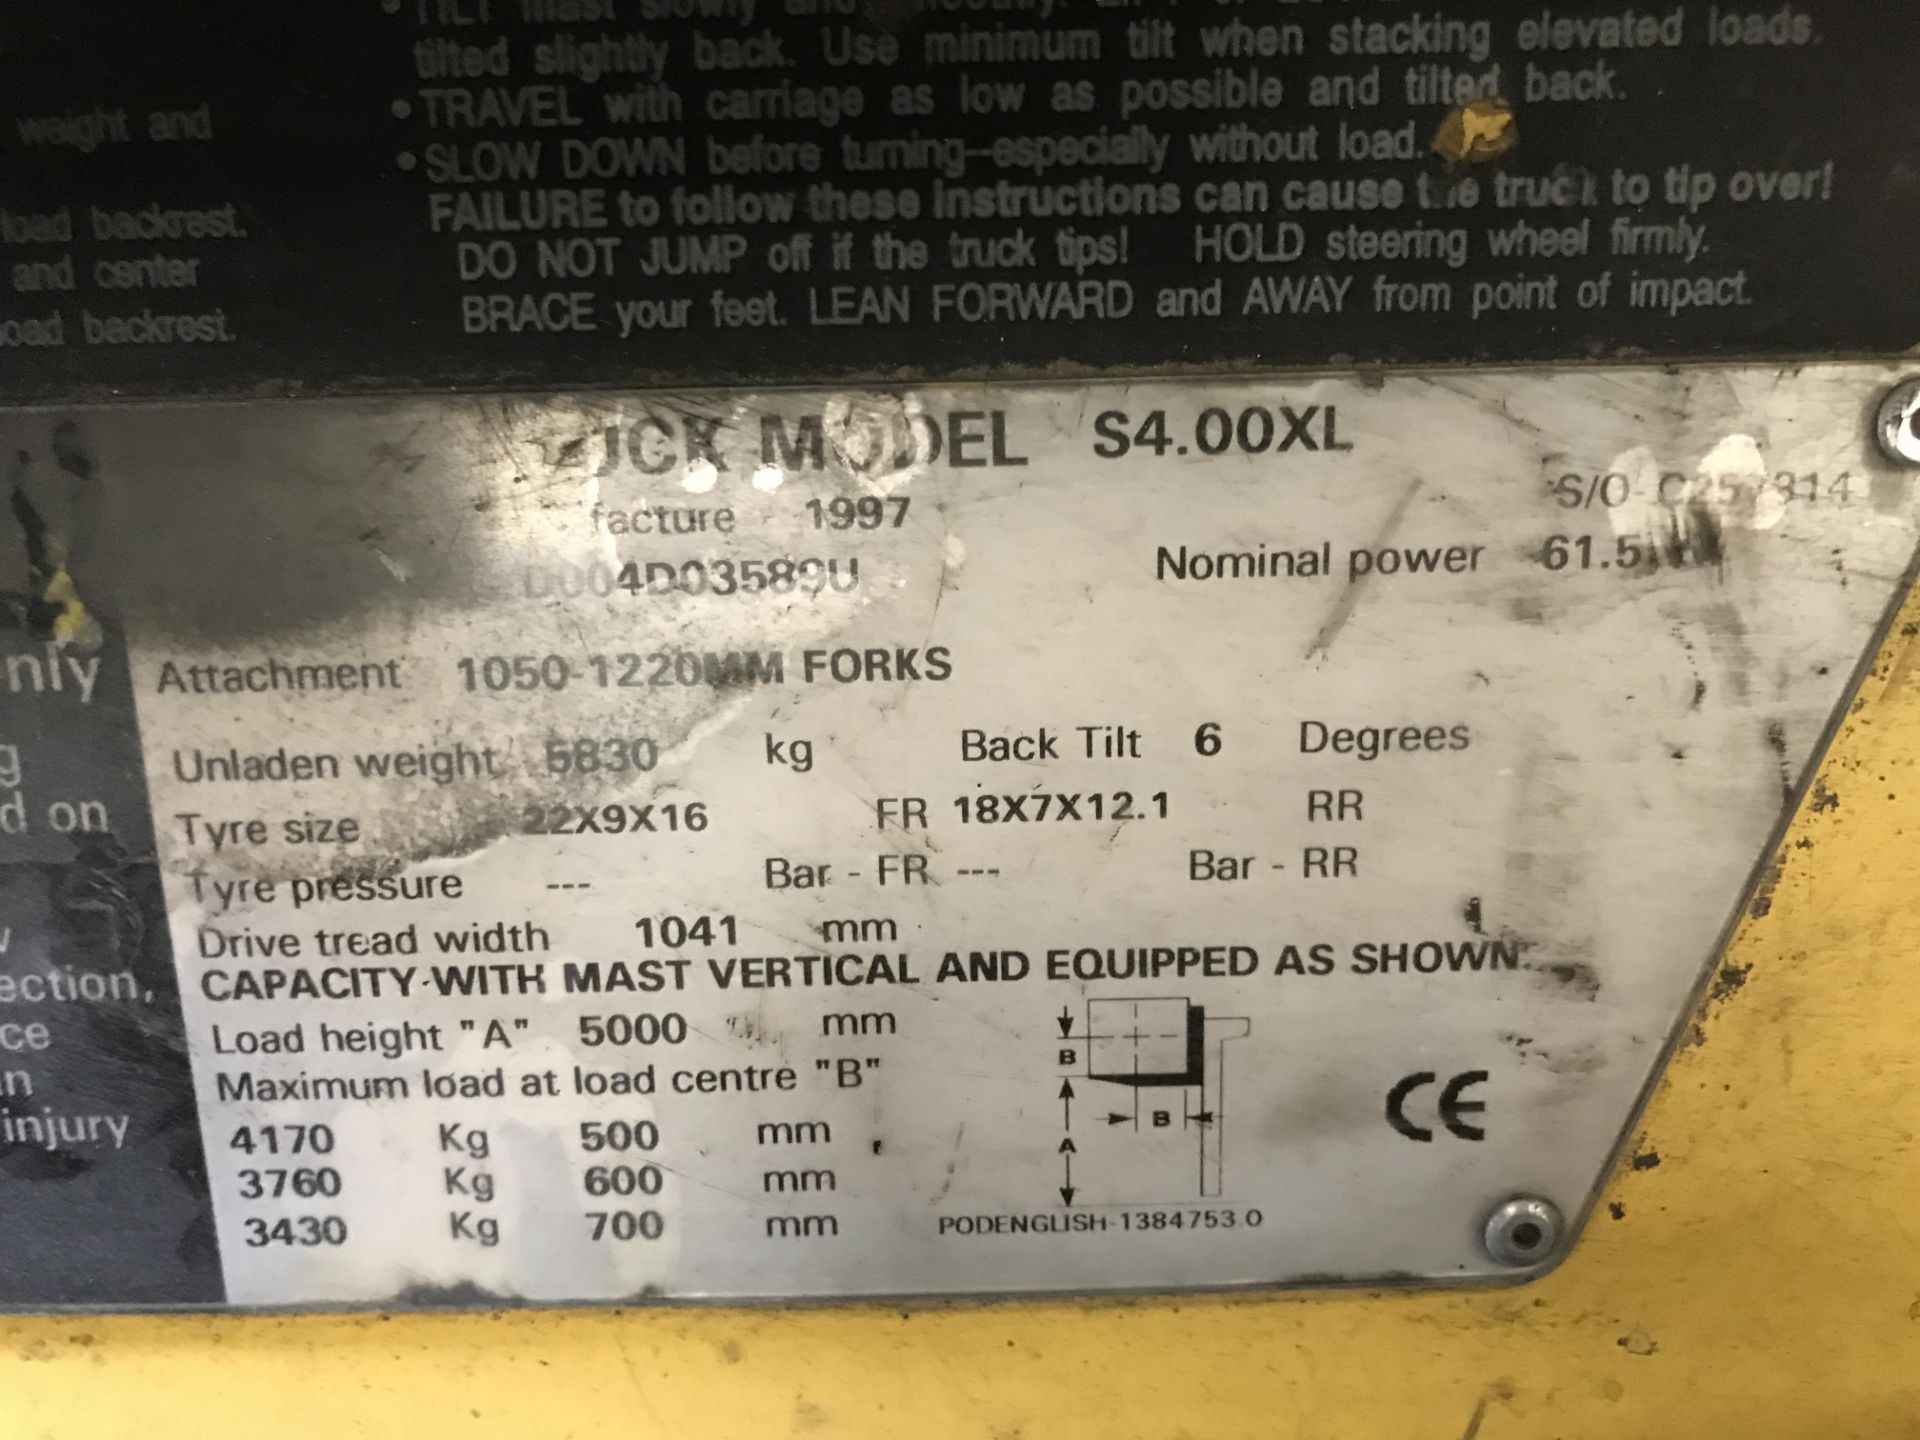 Hyster S4.00XL FL6 DIESEL FORK LIFT TRUCK, serial no. D004D03589U, year of manufacture 1997, - Image 7 of 9